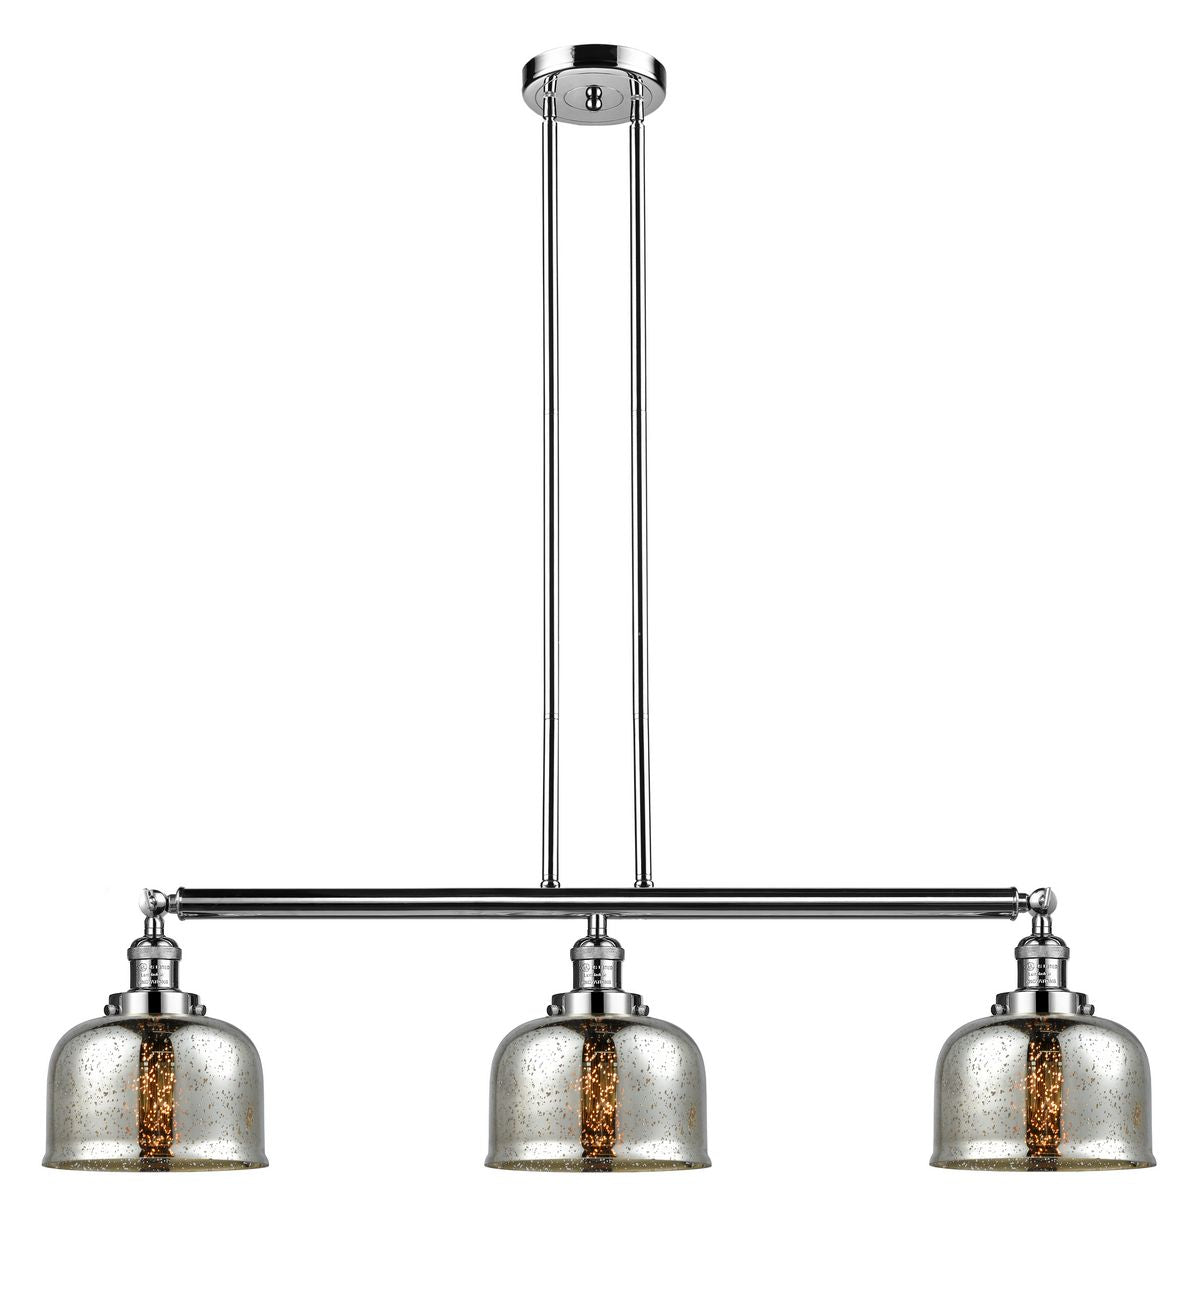 213-PN-G78 3-Light 40.5" Polished Nickel Island Light - Silver Plated Mercury Large Bell Glass - LED Bulb - Dimmensions: 40.5 x 8 x 13<br>Minimum Height : 20<br>Maximum Height : 44 - Sloped Ceiling Compatible: Yes